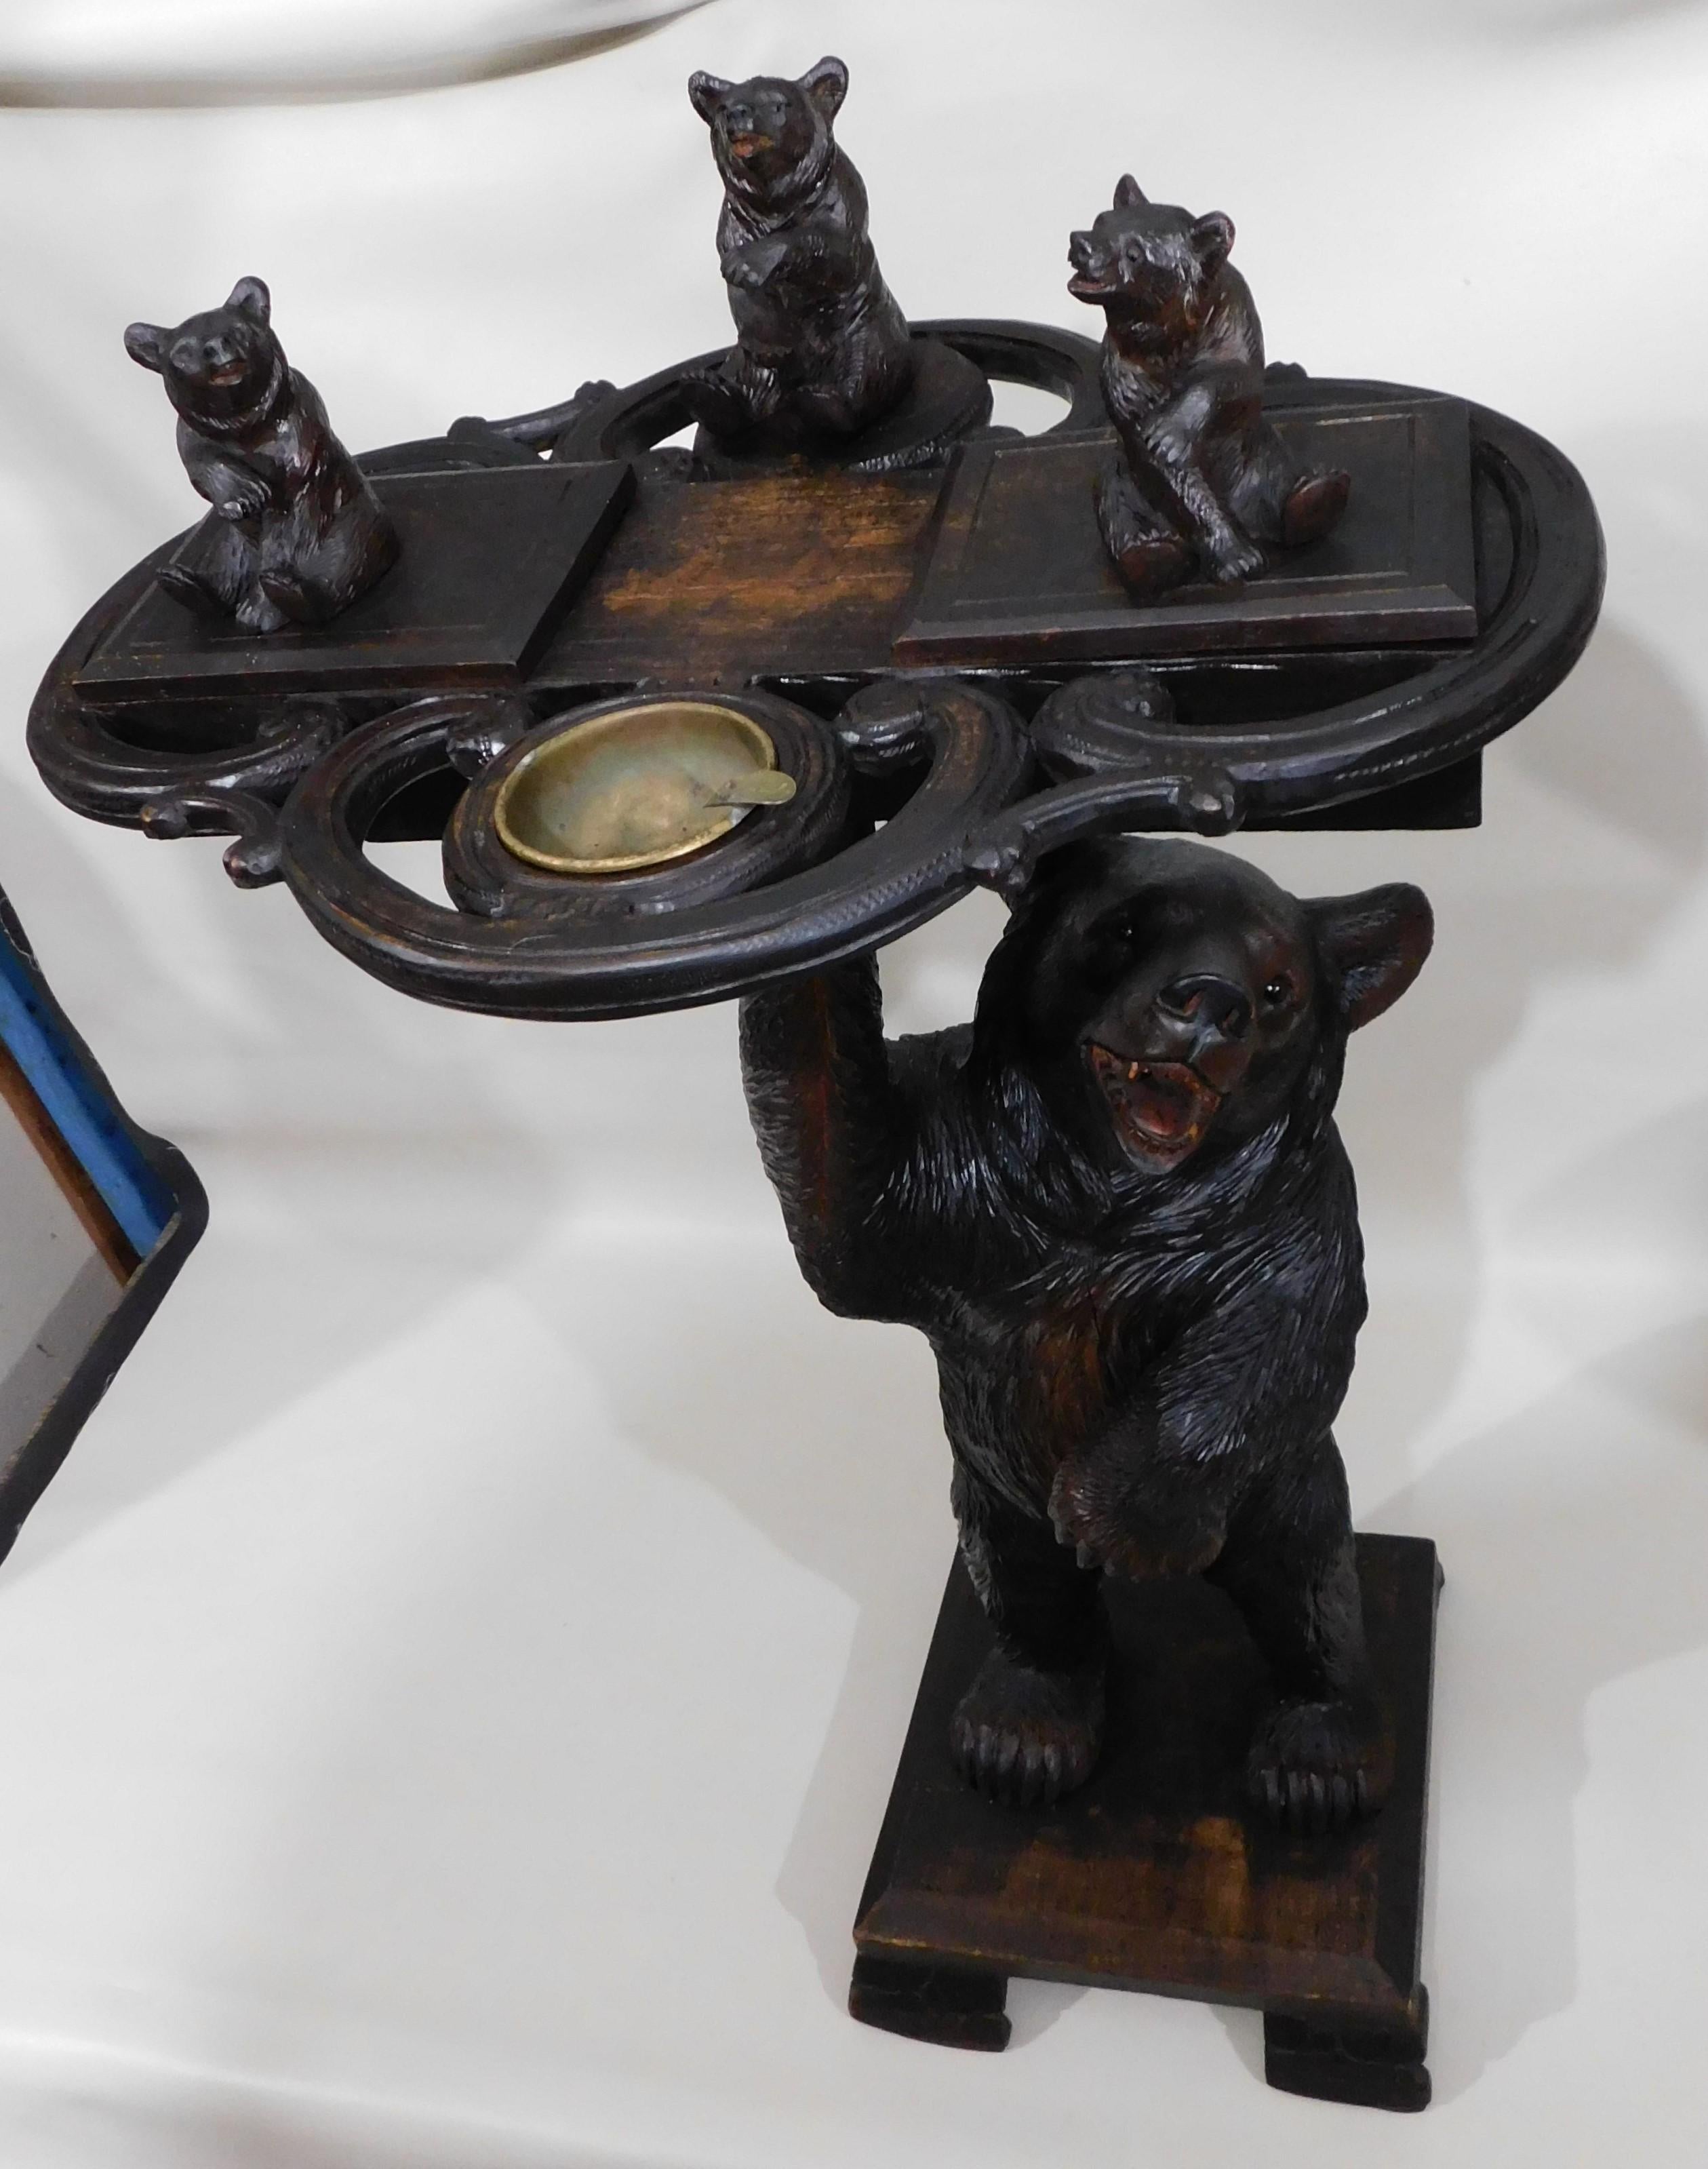 Very stylish Black Forest wood smokers stand, circa 1890. The stand is topped with three realistically carved bears and has a brass ashtray. The two bears at the front are hinged and open to reveal small compartments. The top is being held up by a